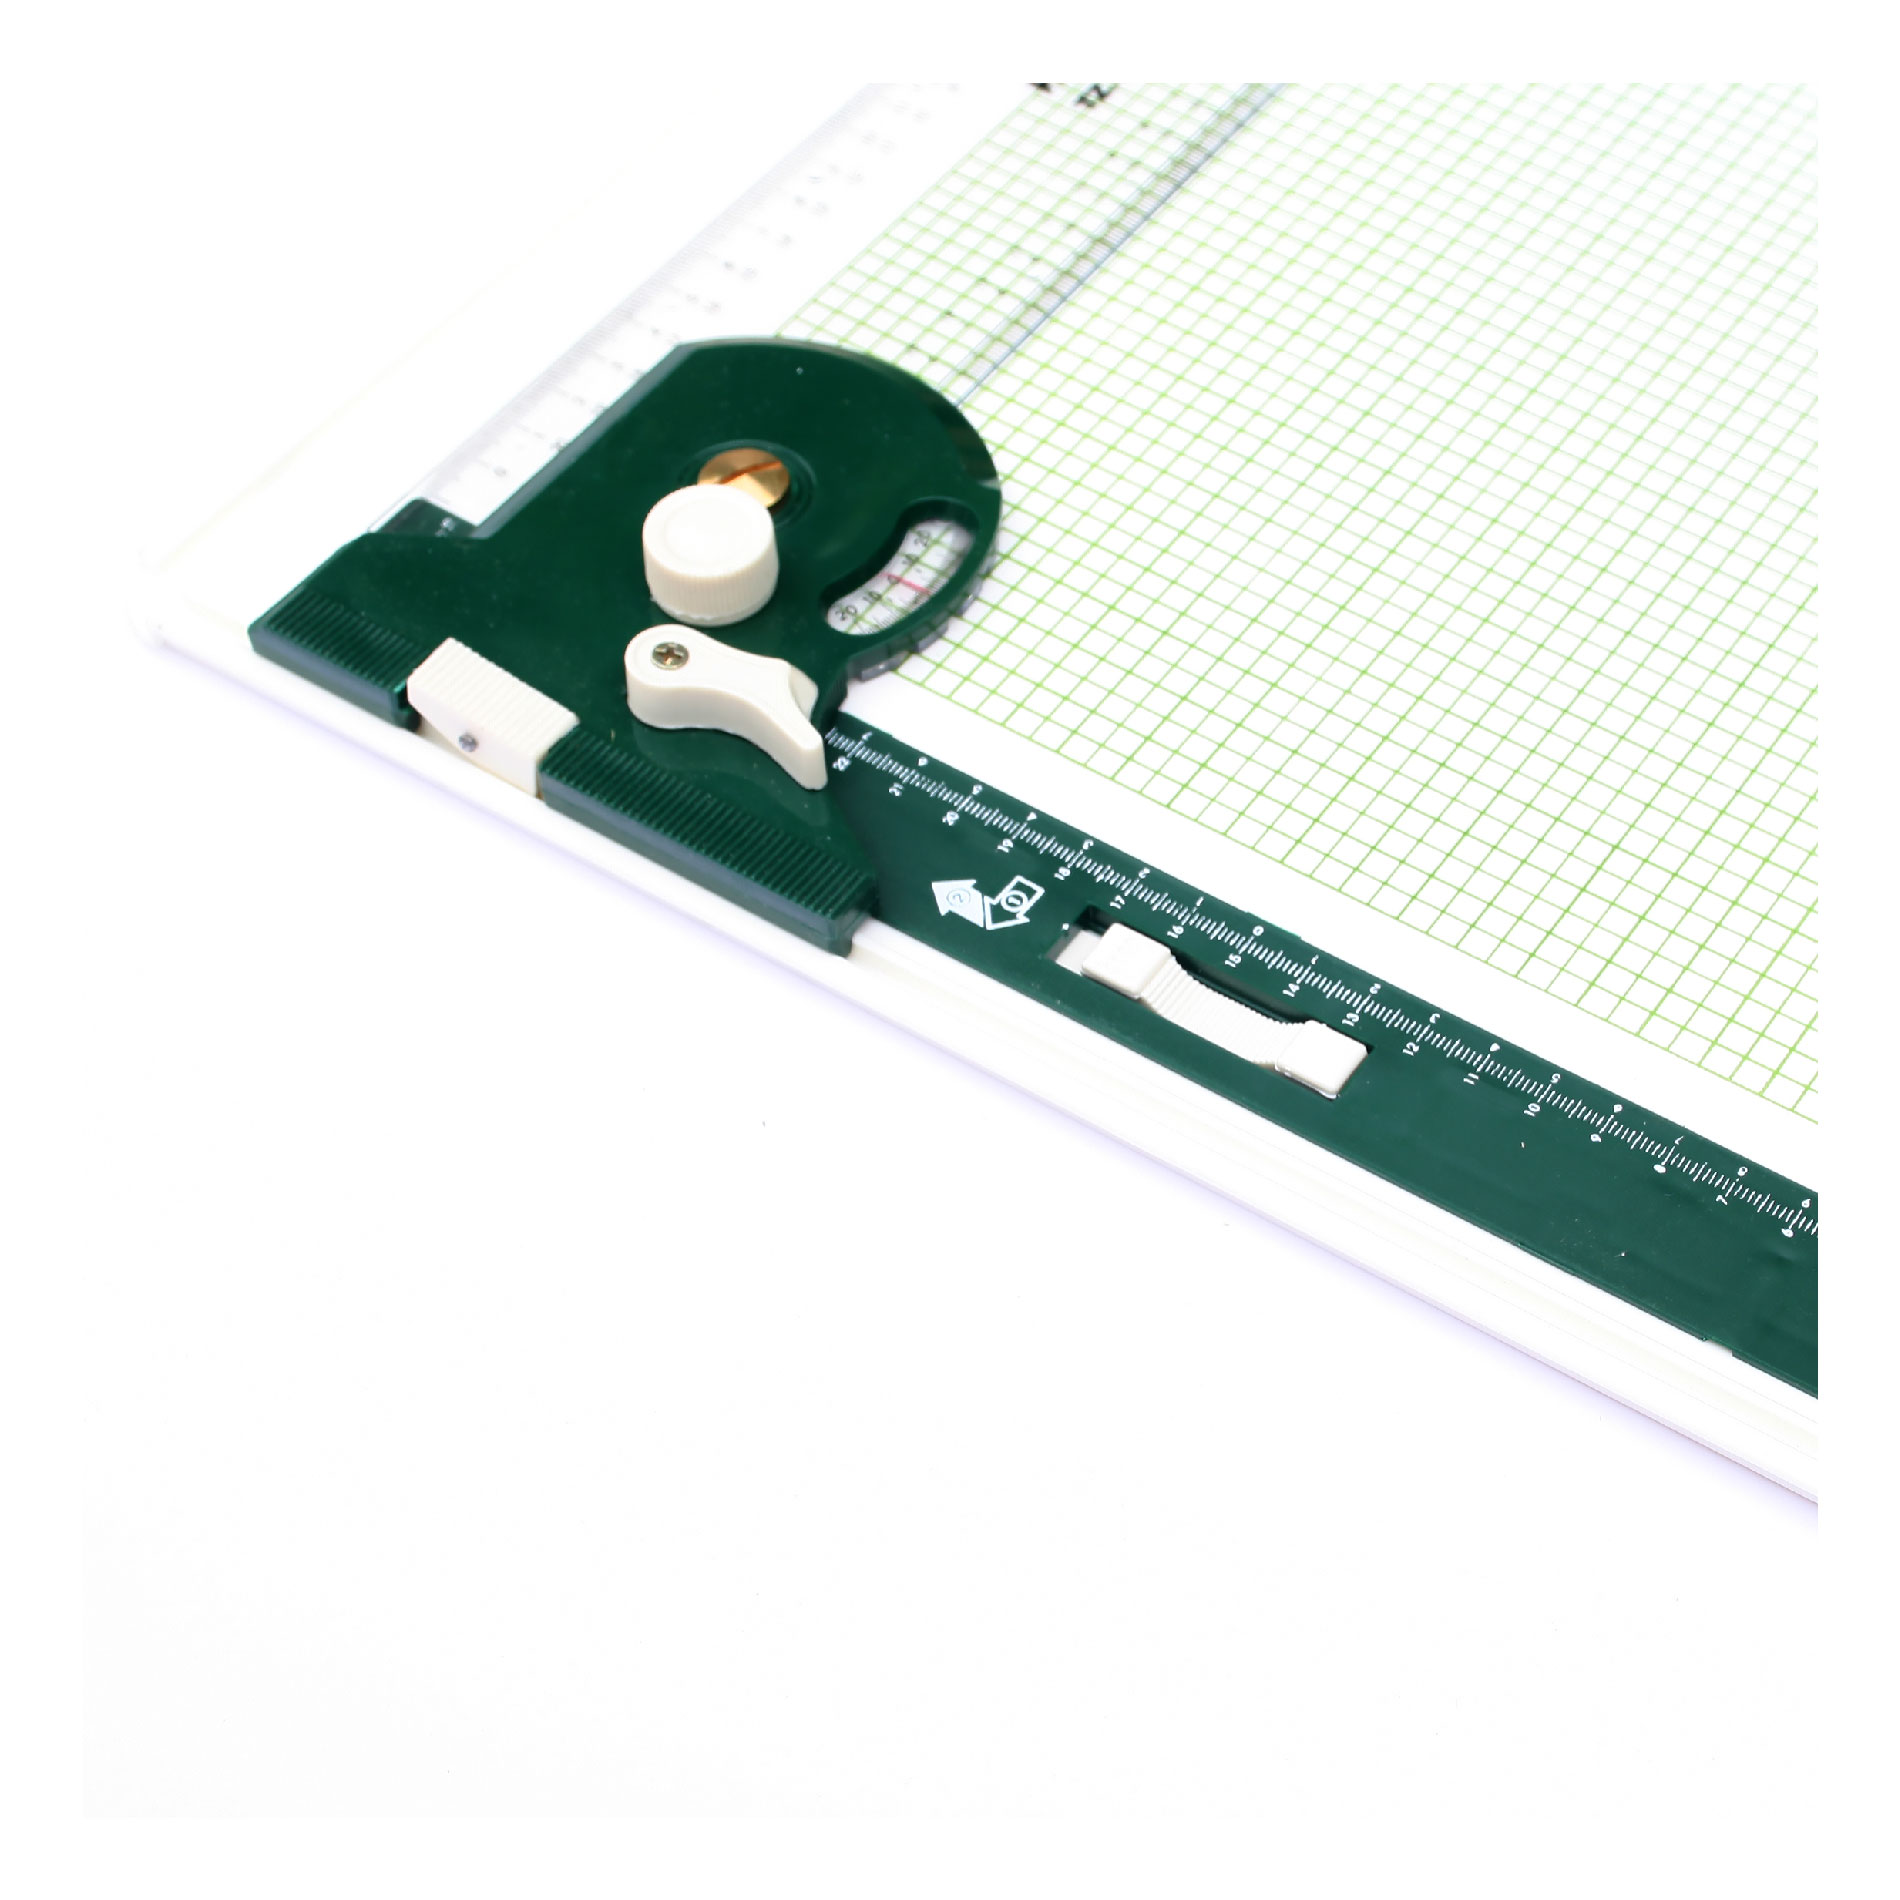 F.E.D.E.Co A3 Drawing boards with Movable ruler and Checker board